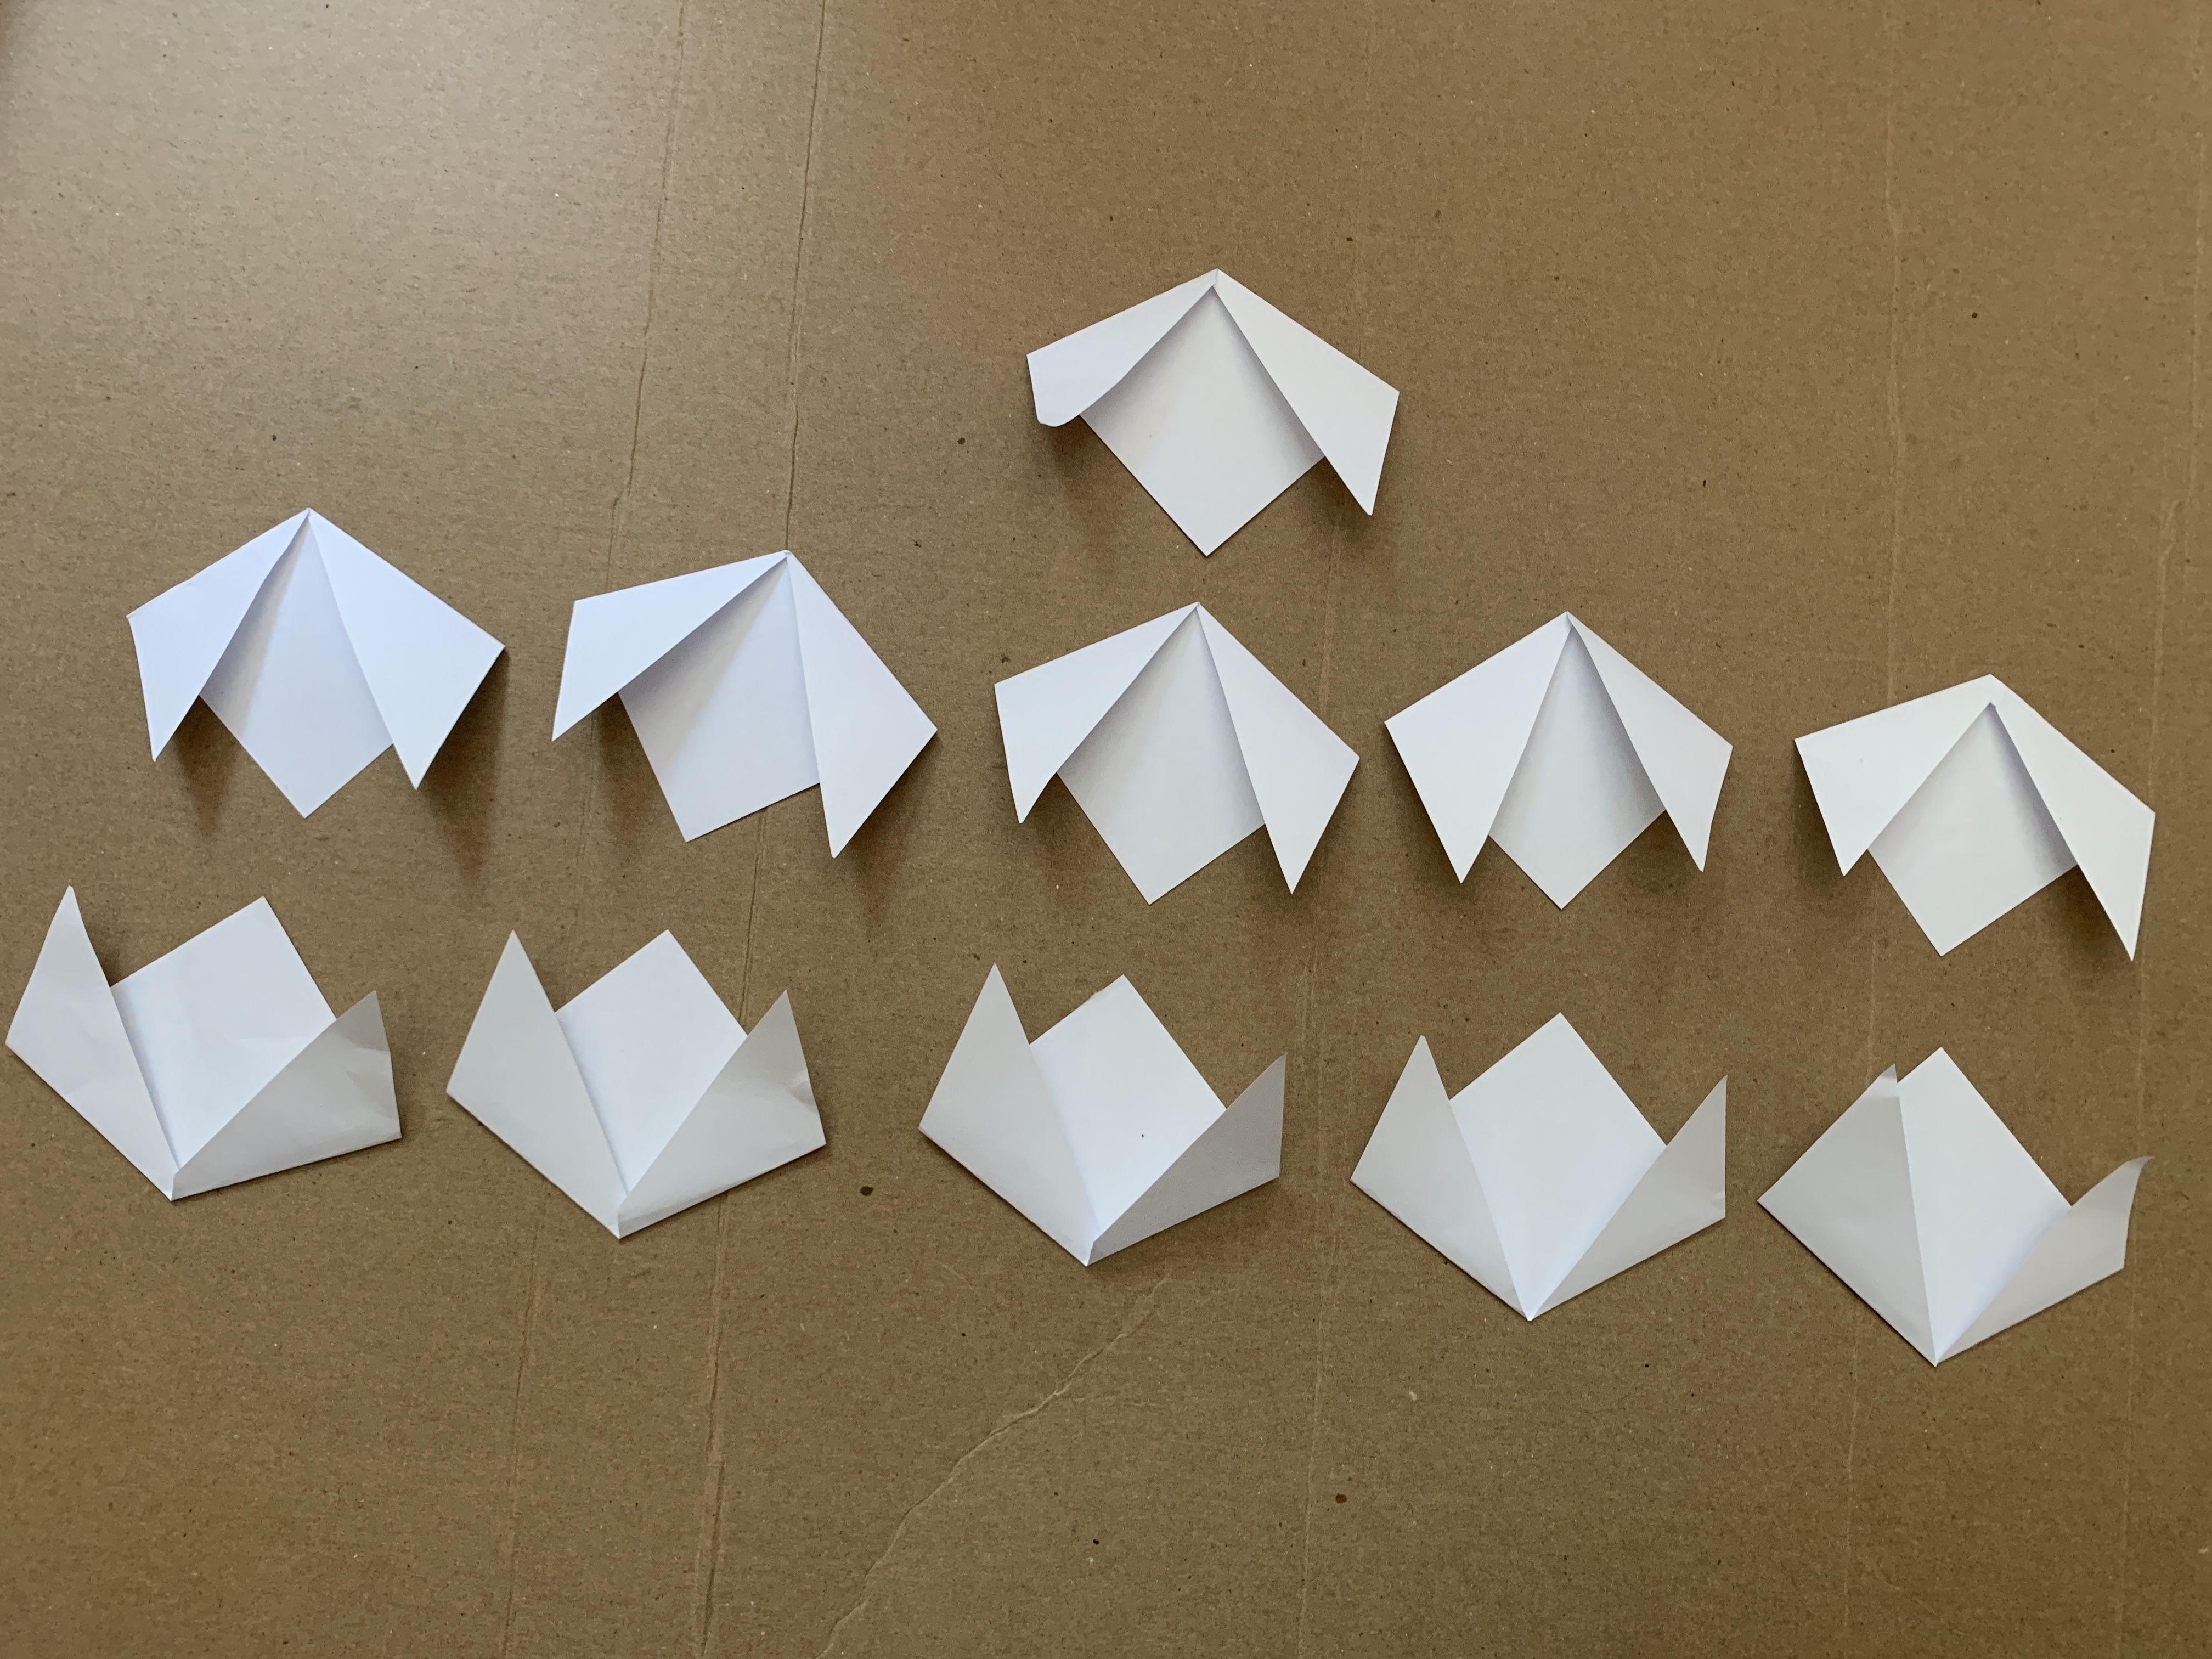 11 pieces of small paper, folded into the same shape.